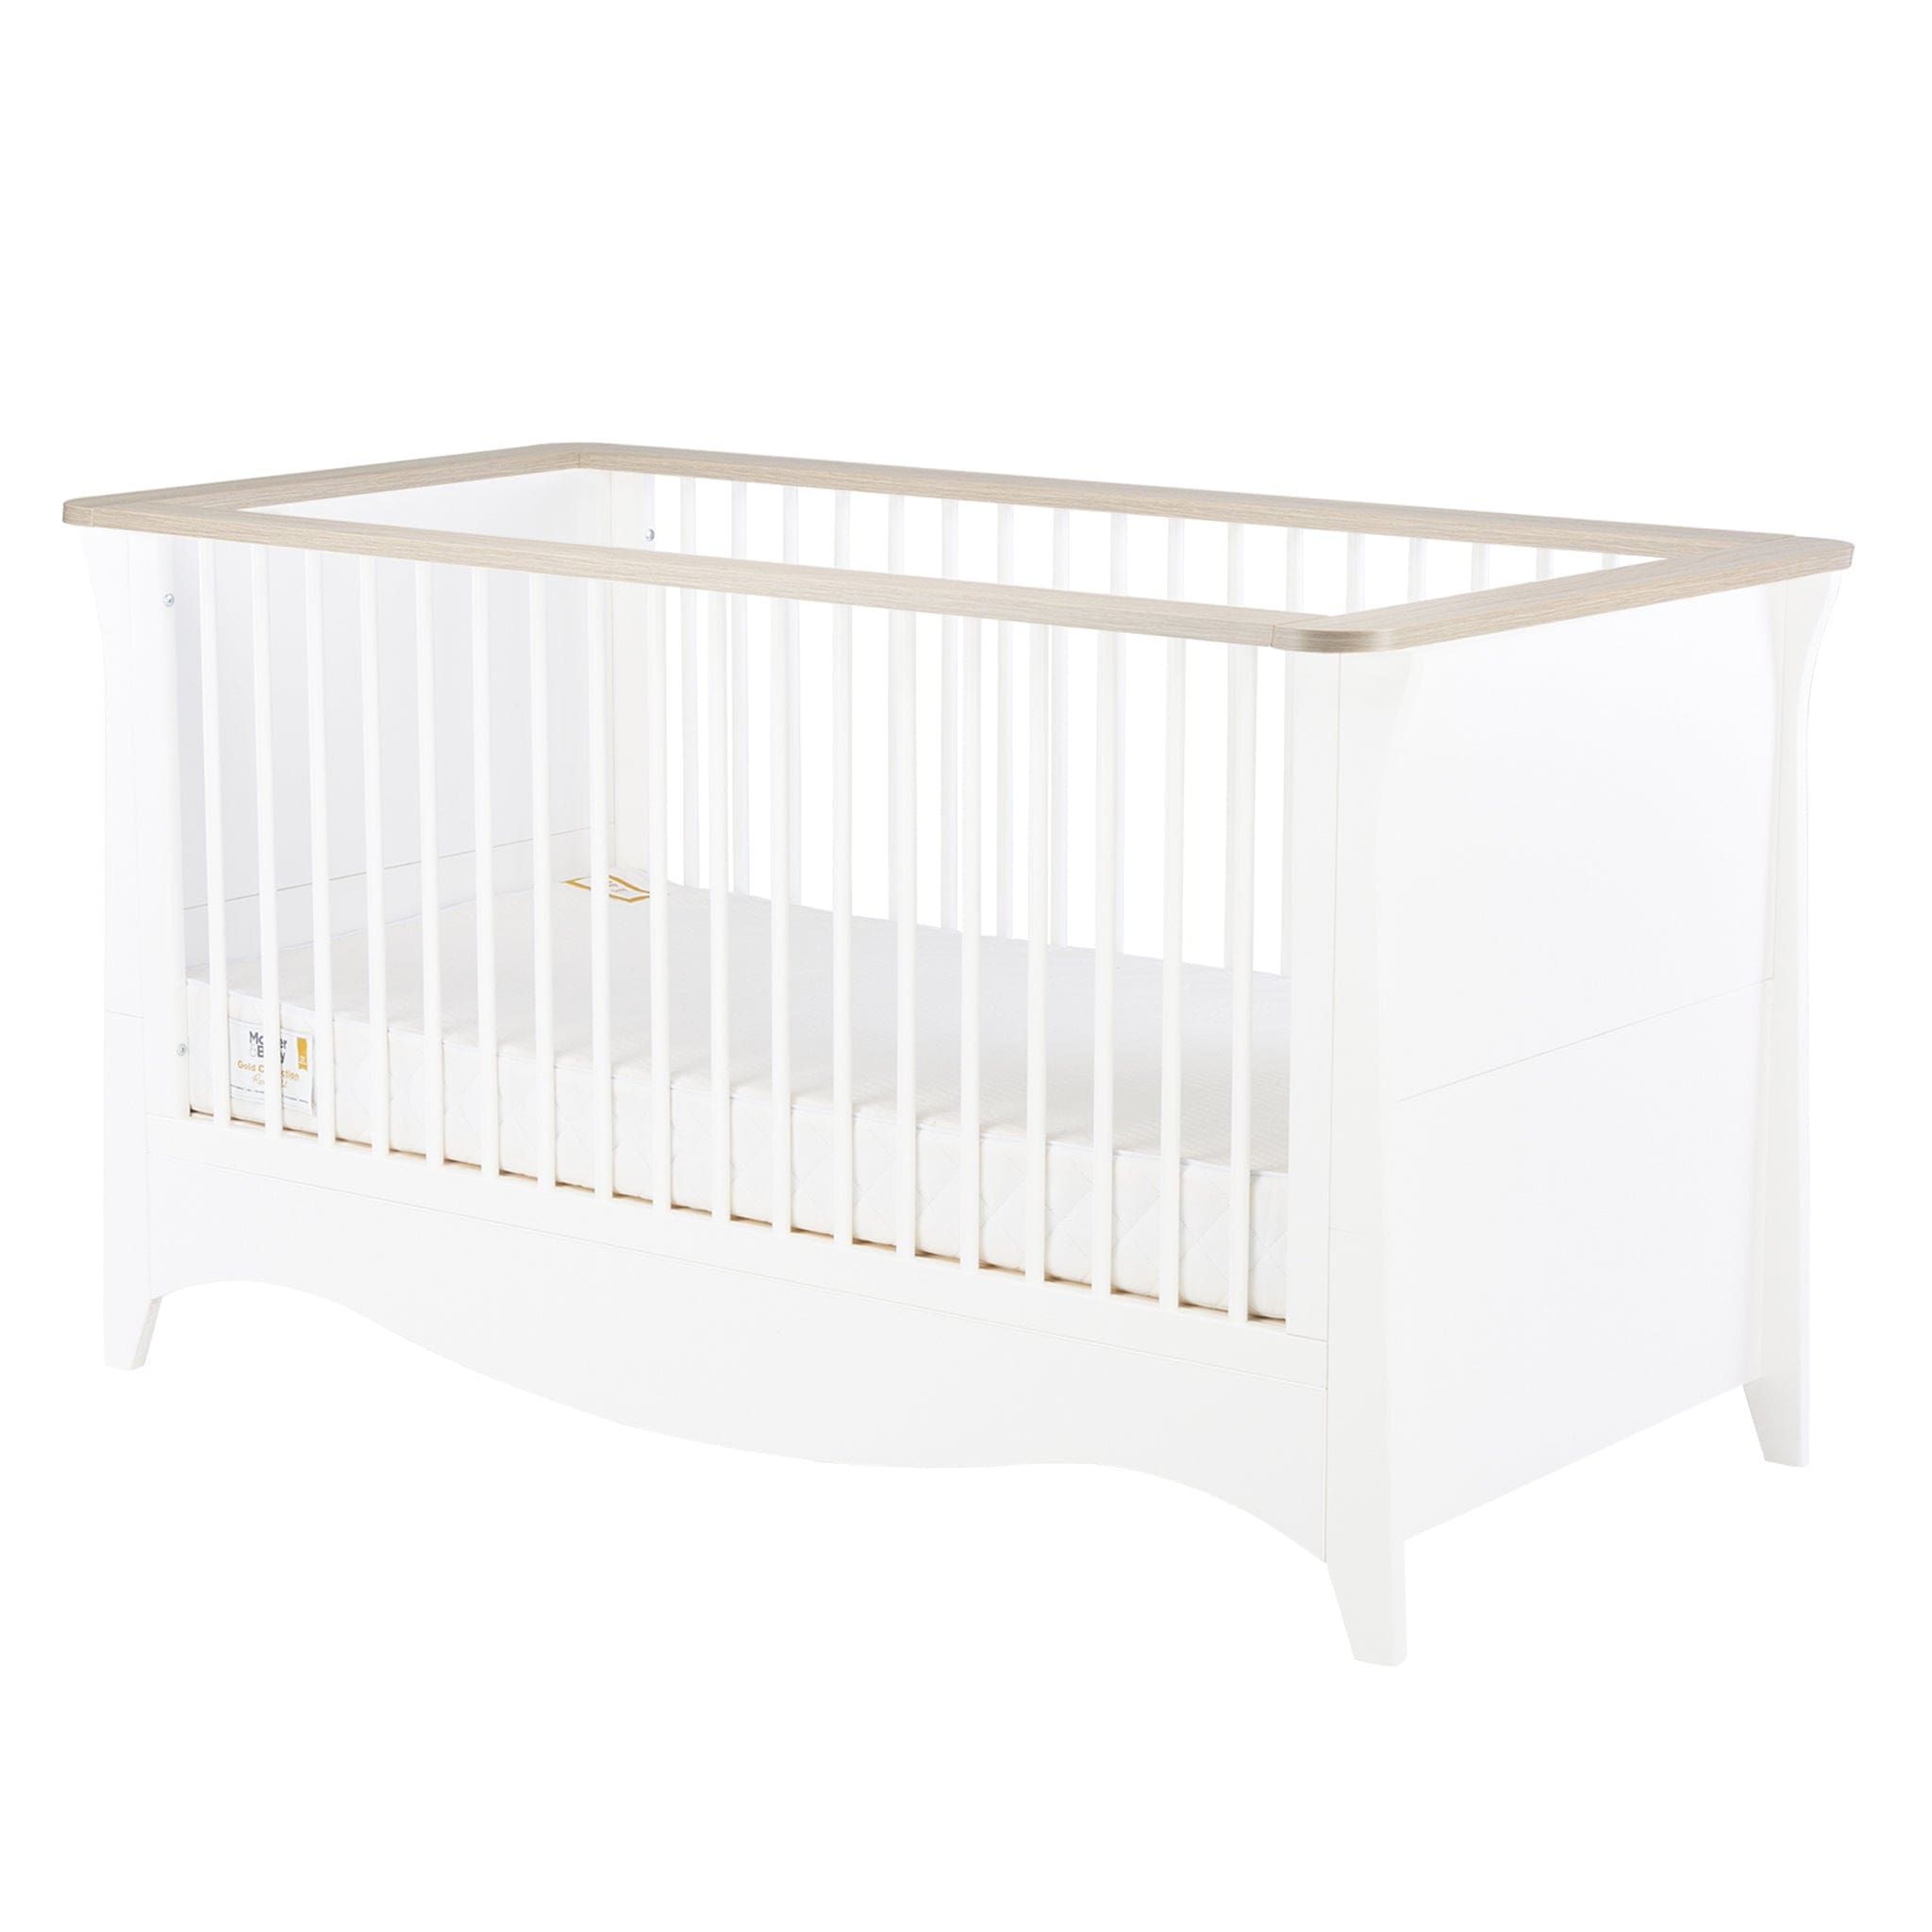 CuddleCo Nursery Room Sets CuddleCo Clara 2Pc Cot Bed Set in White & Ash